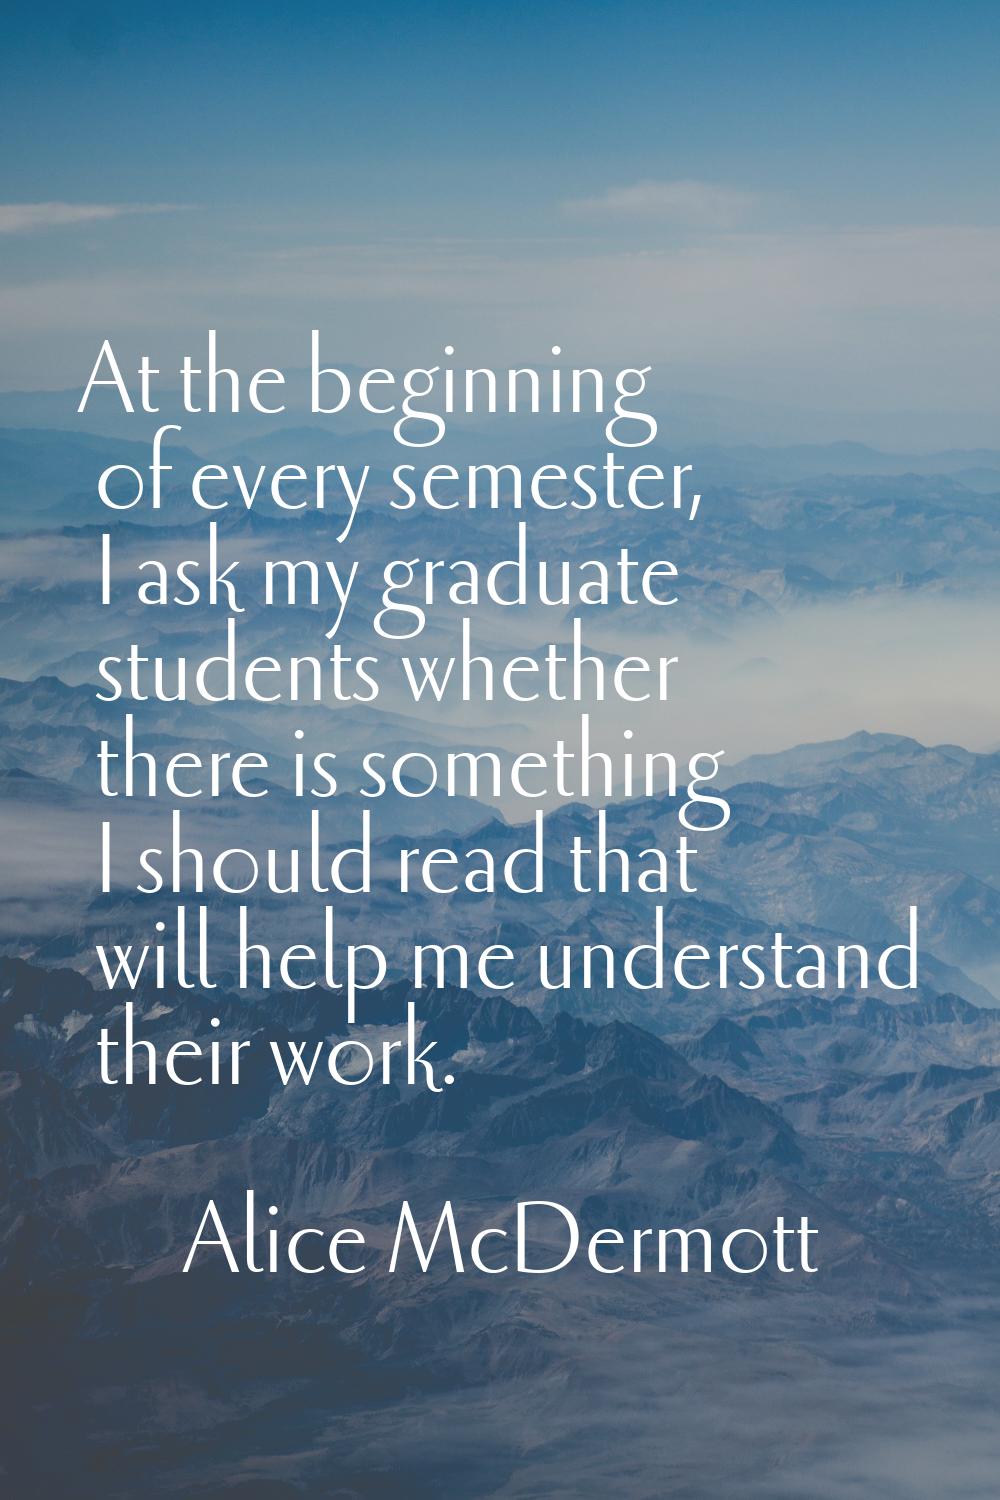 At the beginning of every semester, I ask my graduate students whether there is something I should 